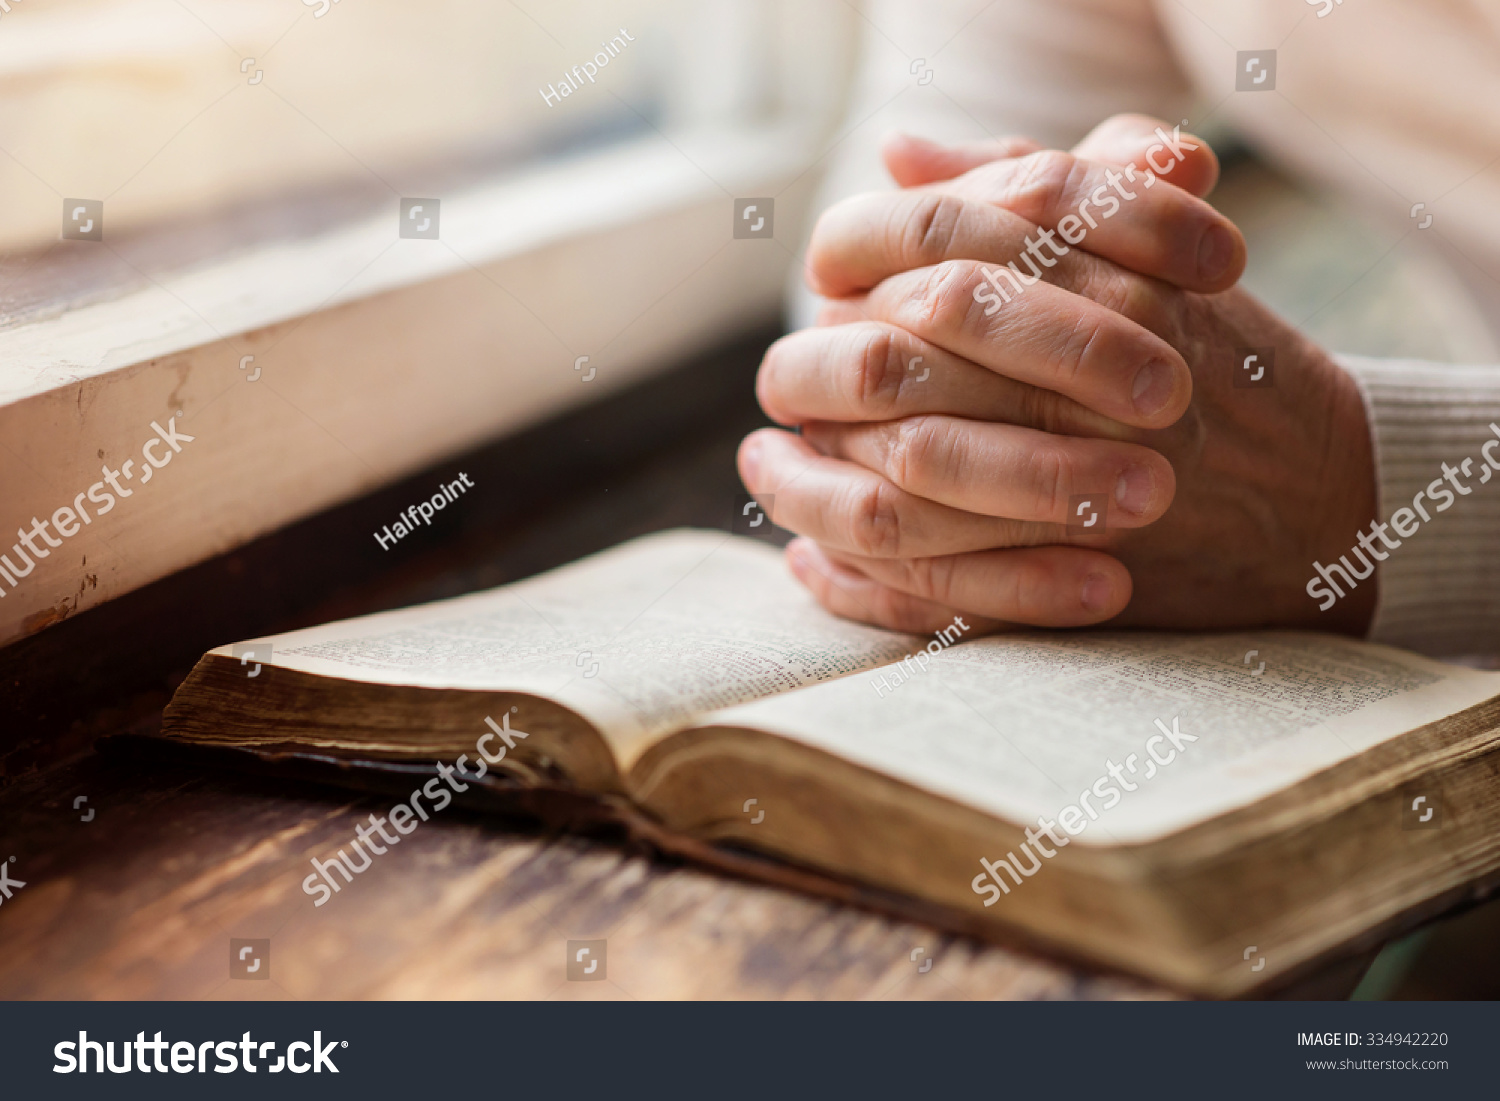 Unrecognizable woman holding a bible in her hands and praying #334942220